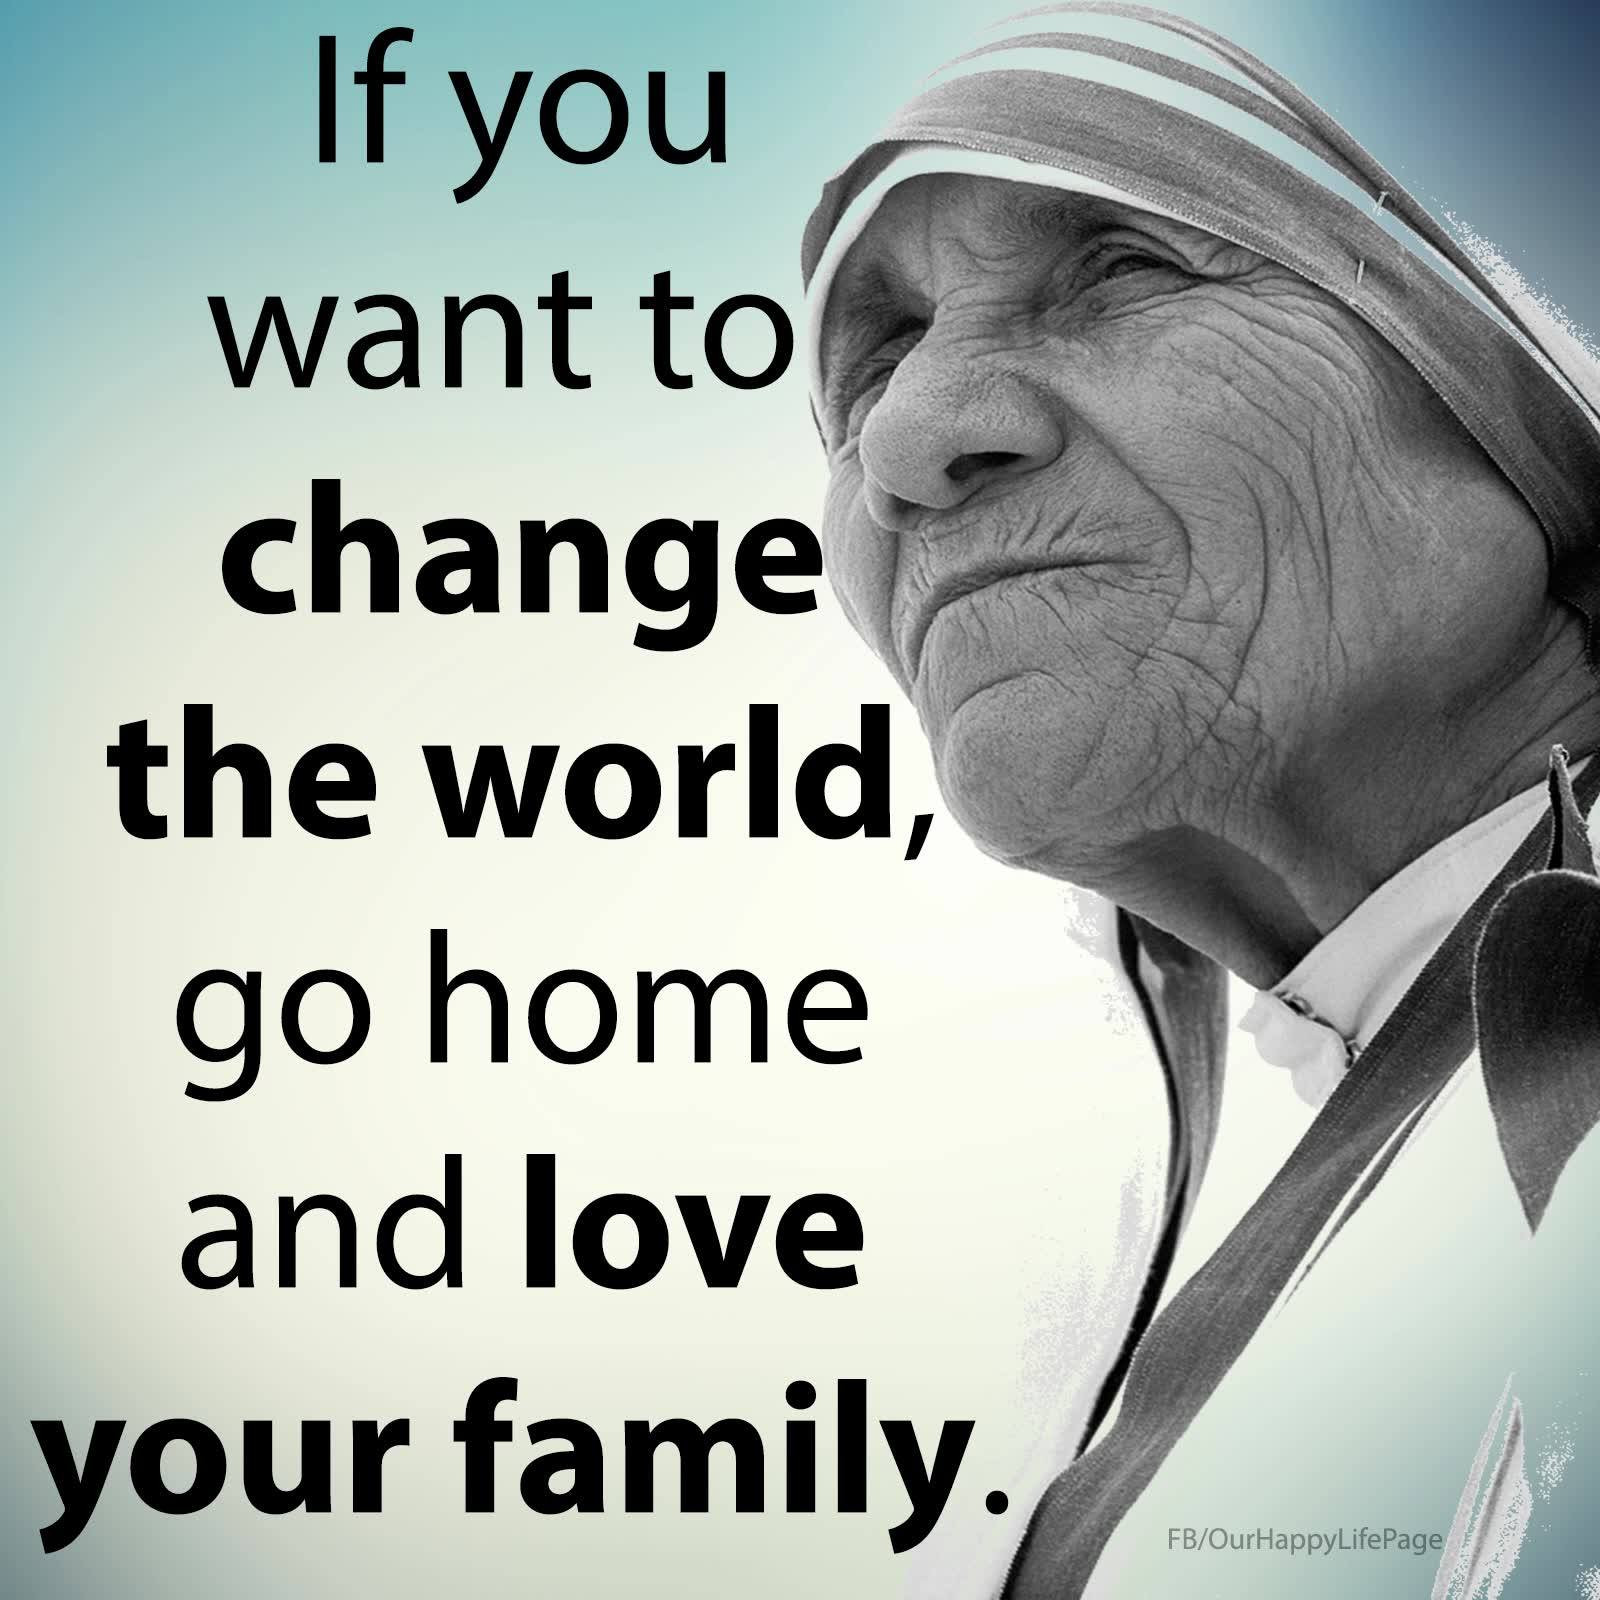 quotes-from-mother-teresa-unique-mrs-therese-regnier-third-grade-of-quotes-from-mother-teresa.jpg